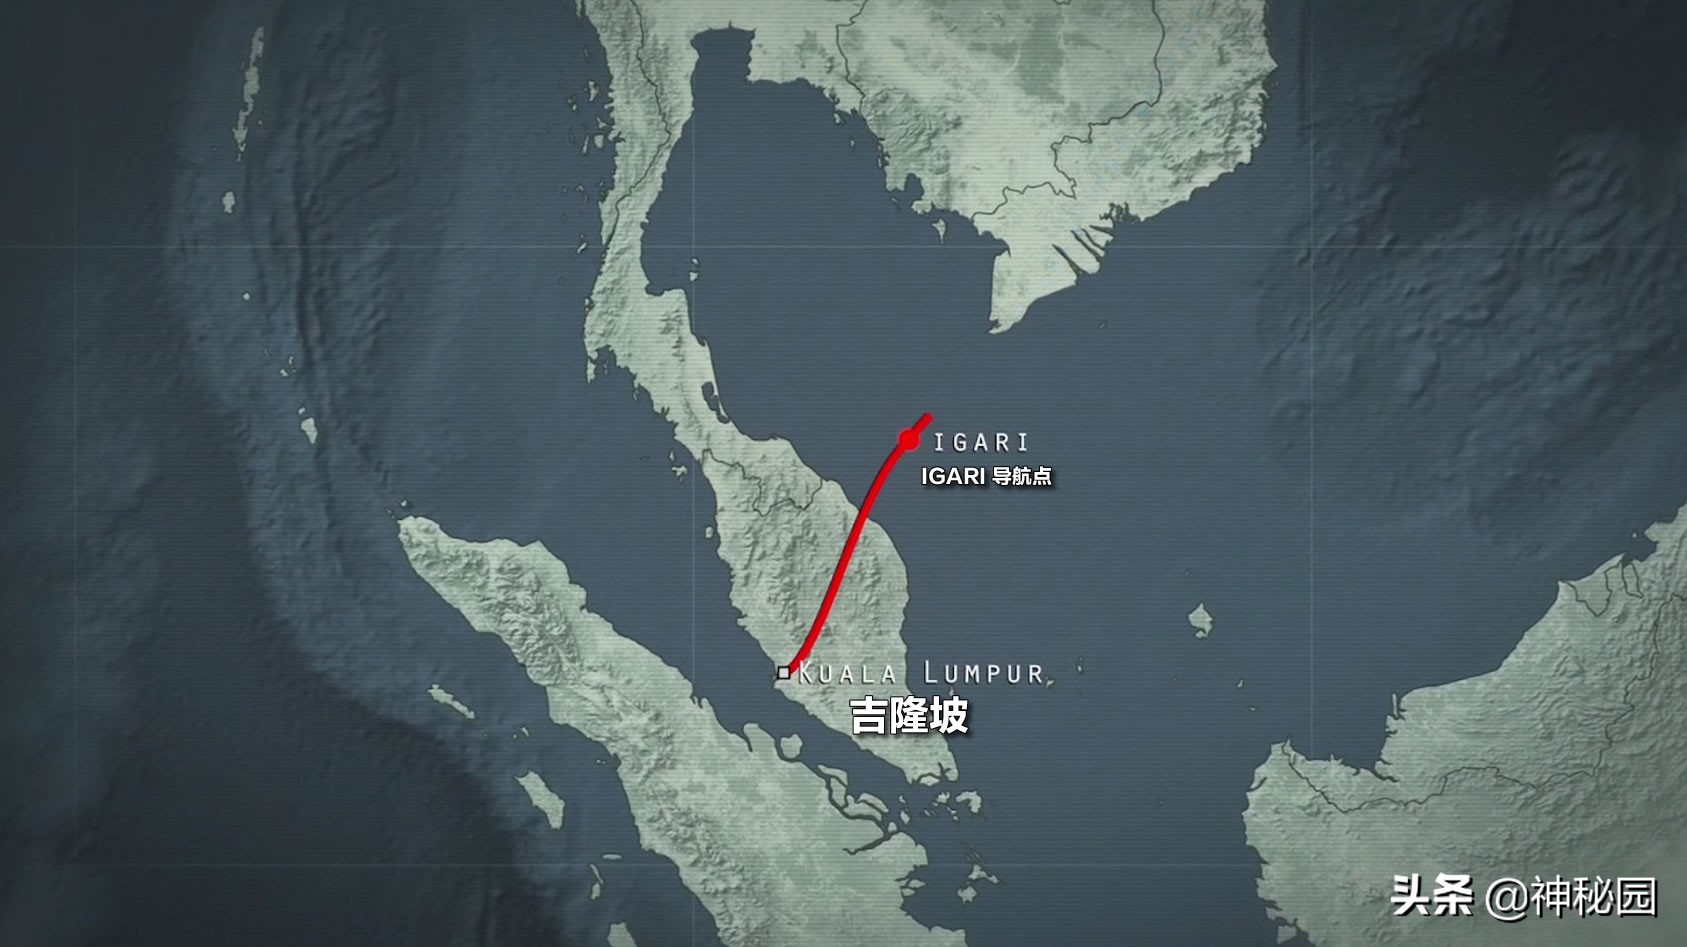 Update on the missing Malaysian aircraft, MH370